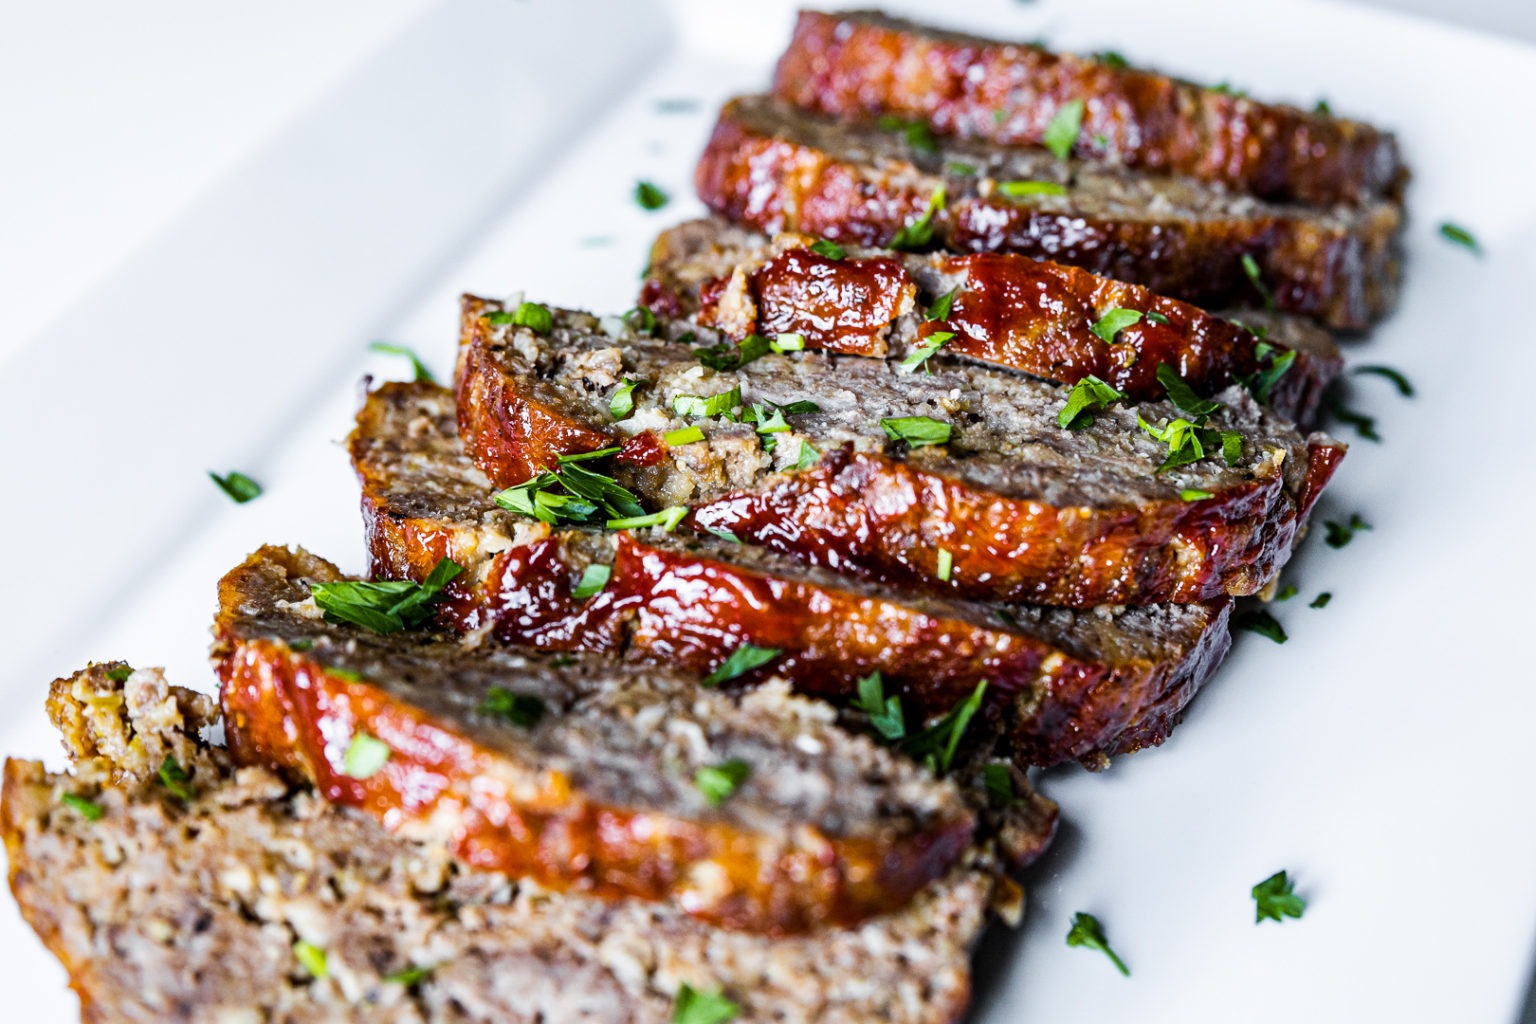 How to Make Meatloaf: Thermal Considerations | ThermoWorks